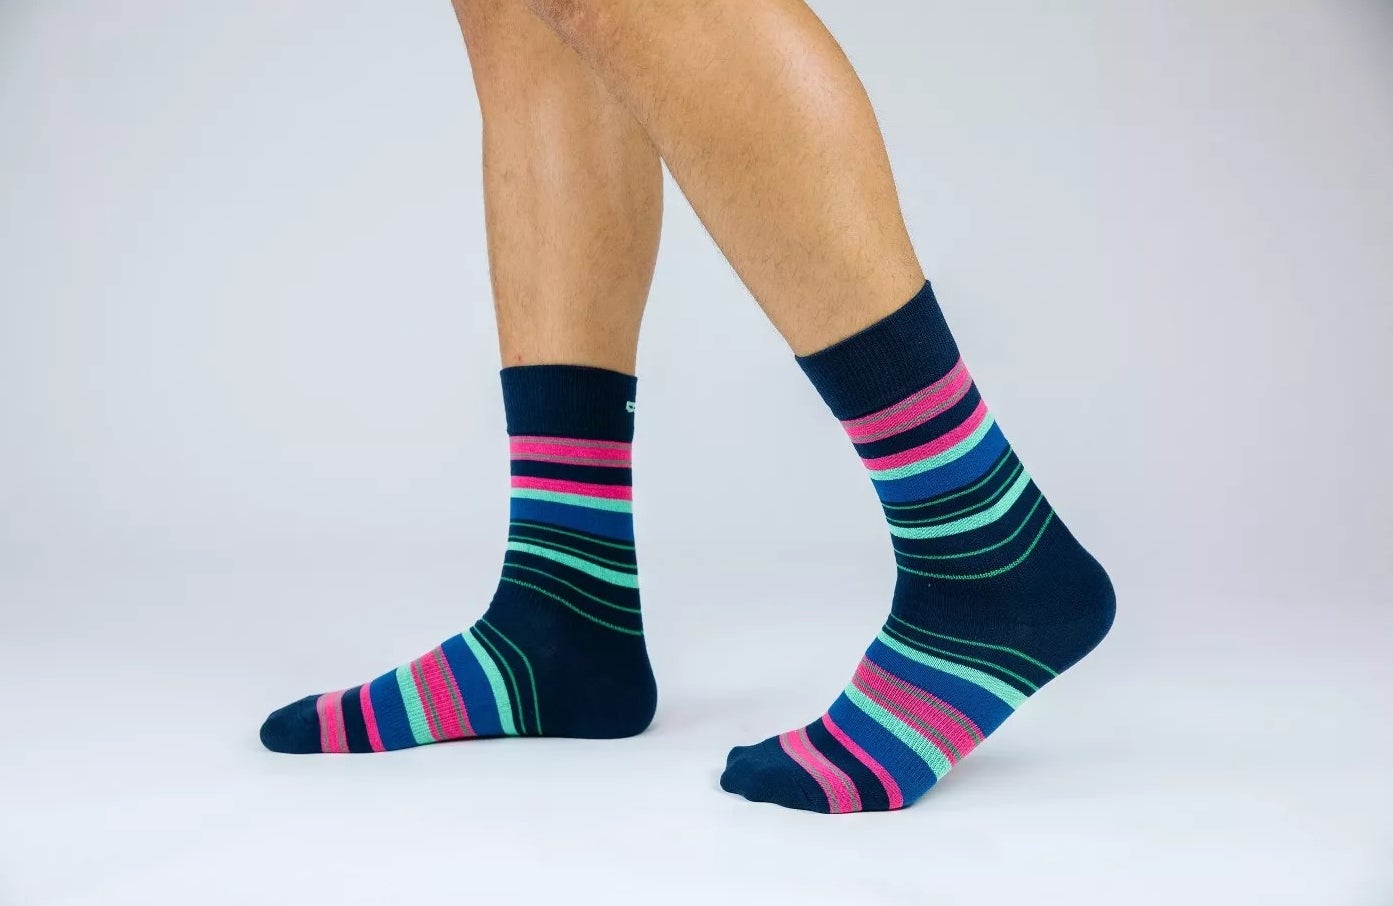 An adult model wearing a pair of the socks with multi-colored stripes